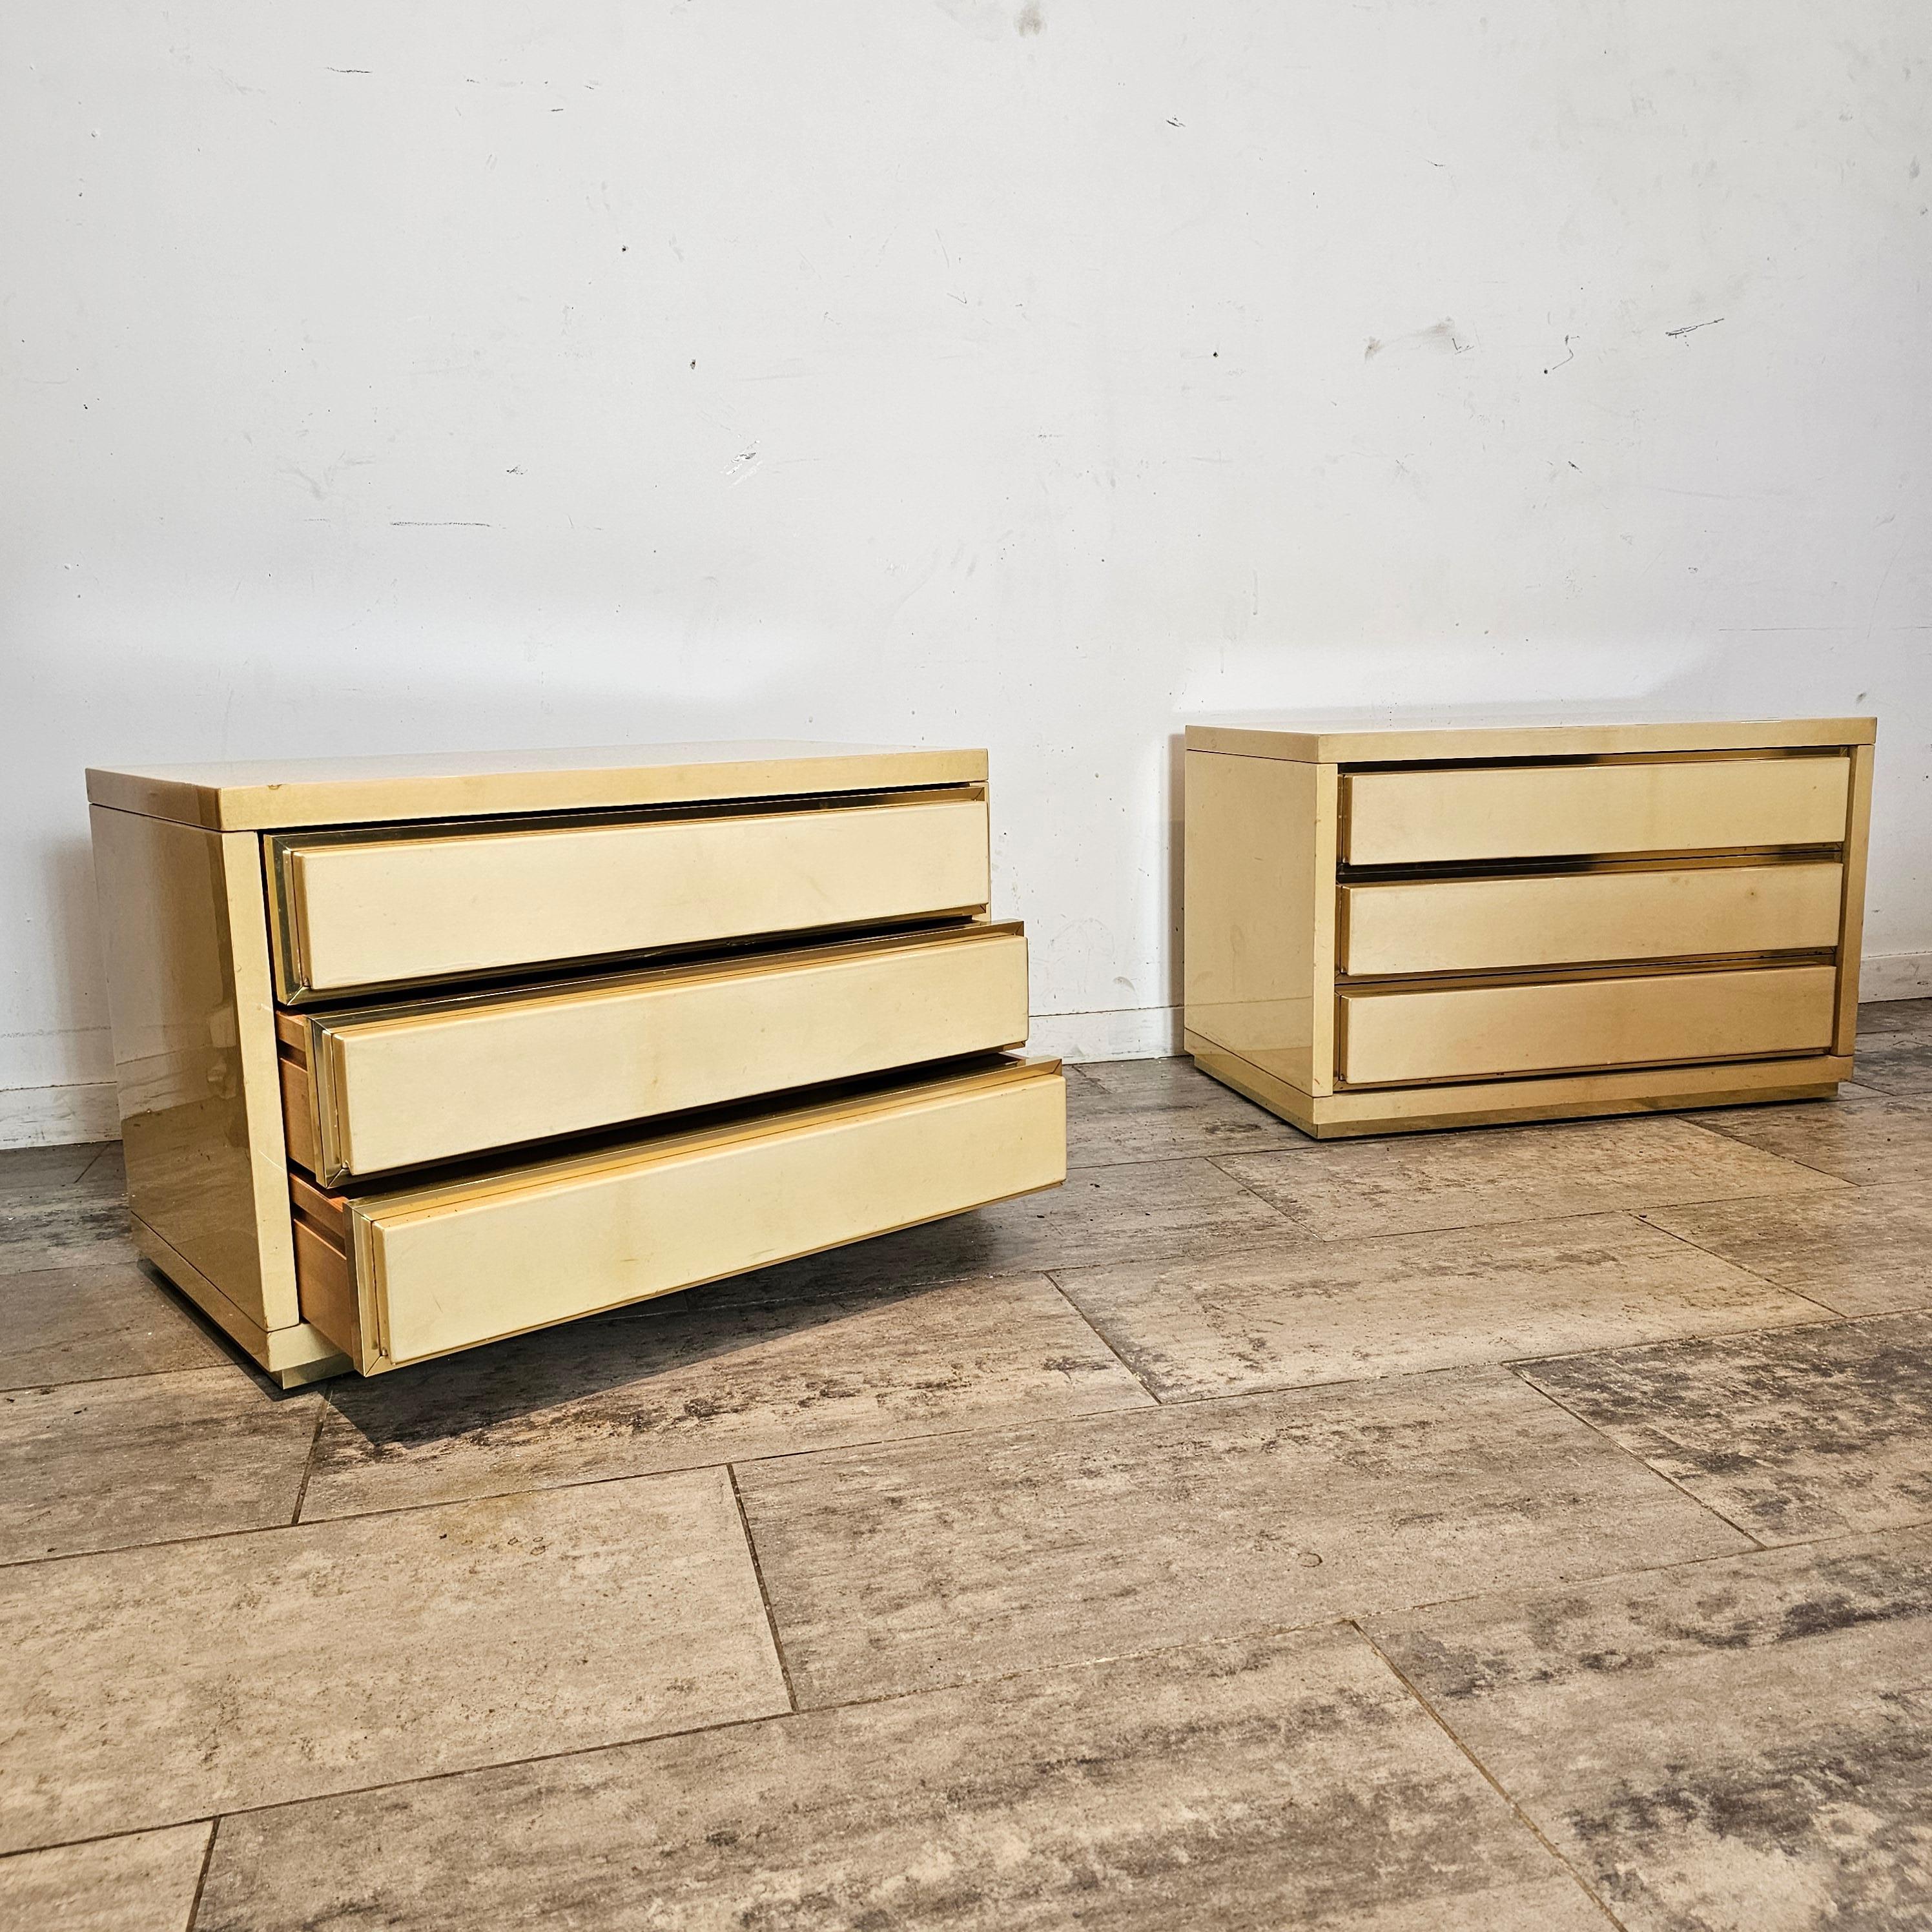 Late 20th Century Pair of Bedsides in Ivory Color, from Aldo Tura, Italy 1970s For Sale